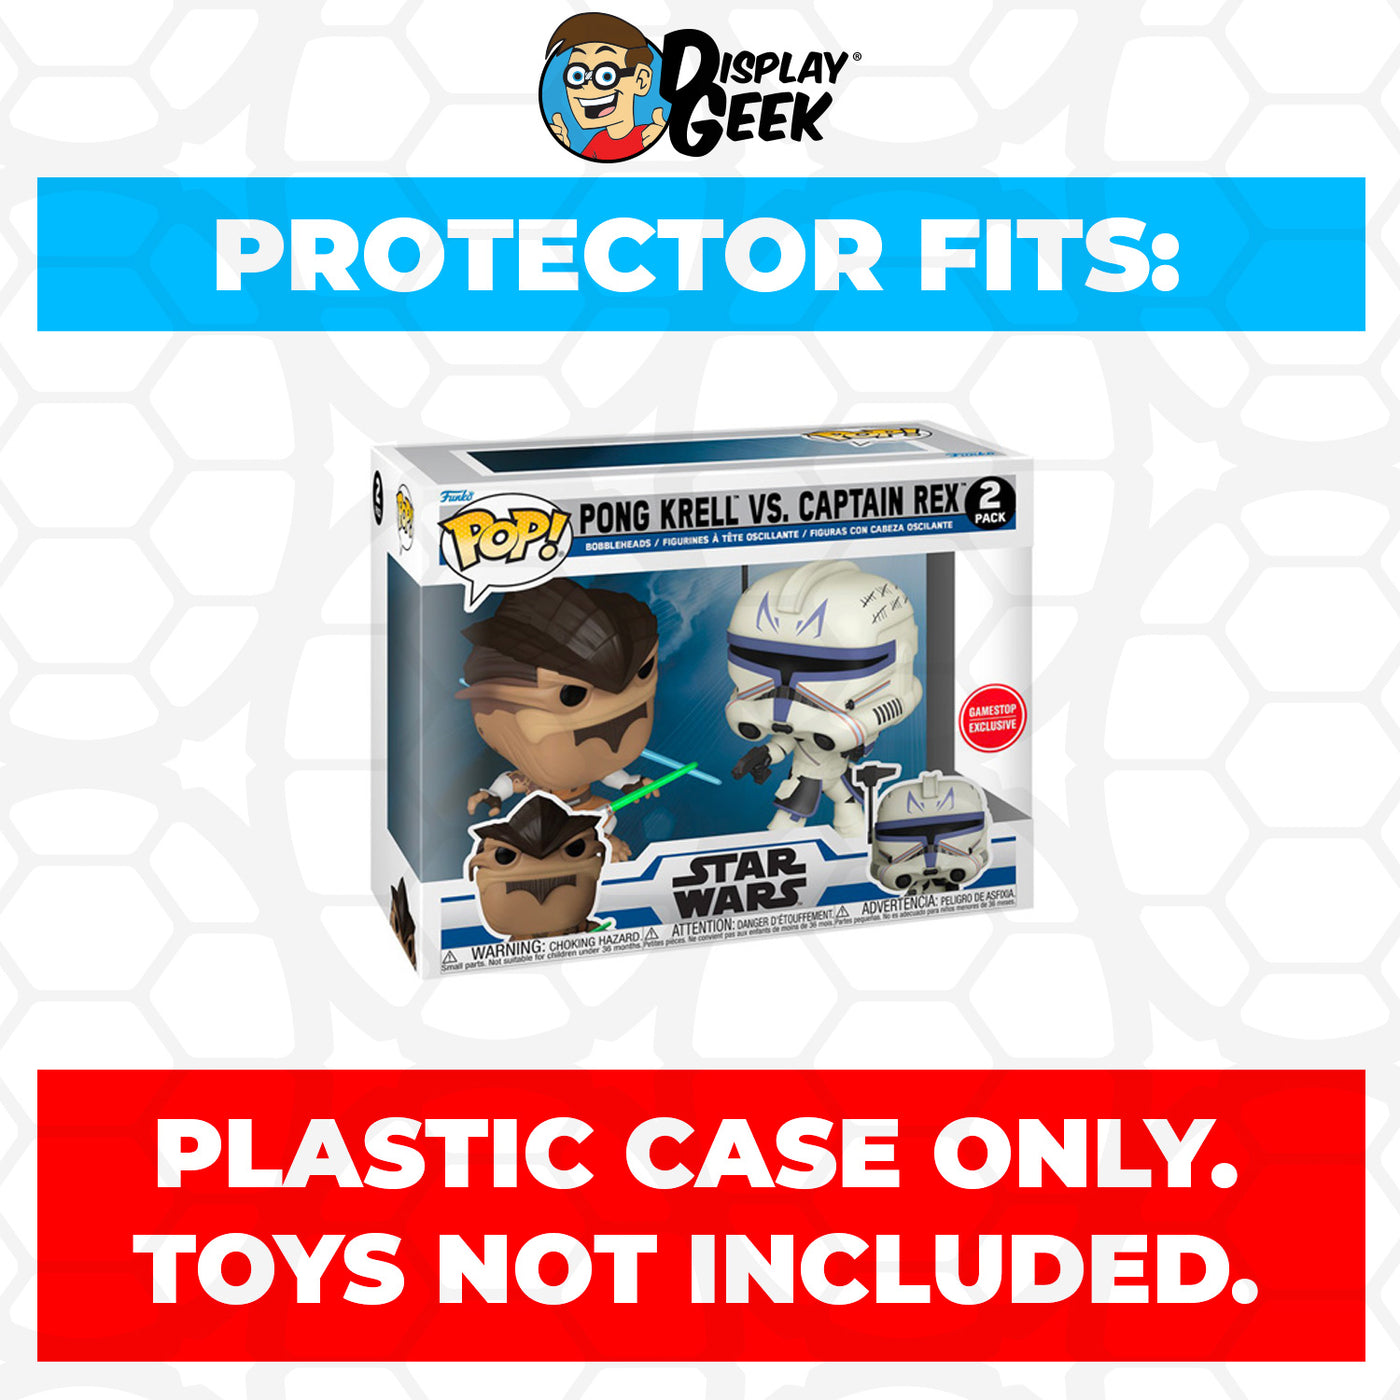 Pop Protector for 2 Pack Pong Krell vs Captain Rex Funko Pop on The Protector Guide App by Display Geek